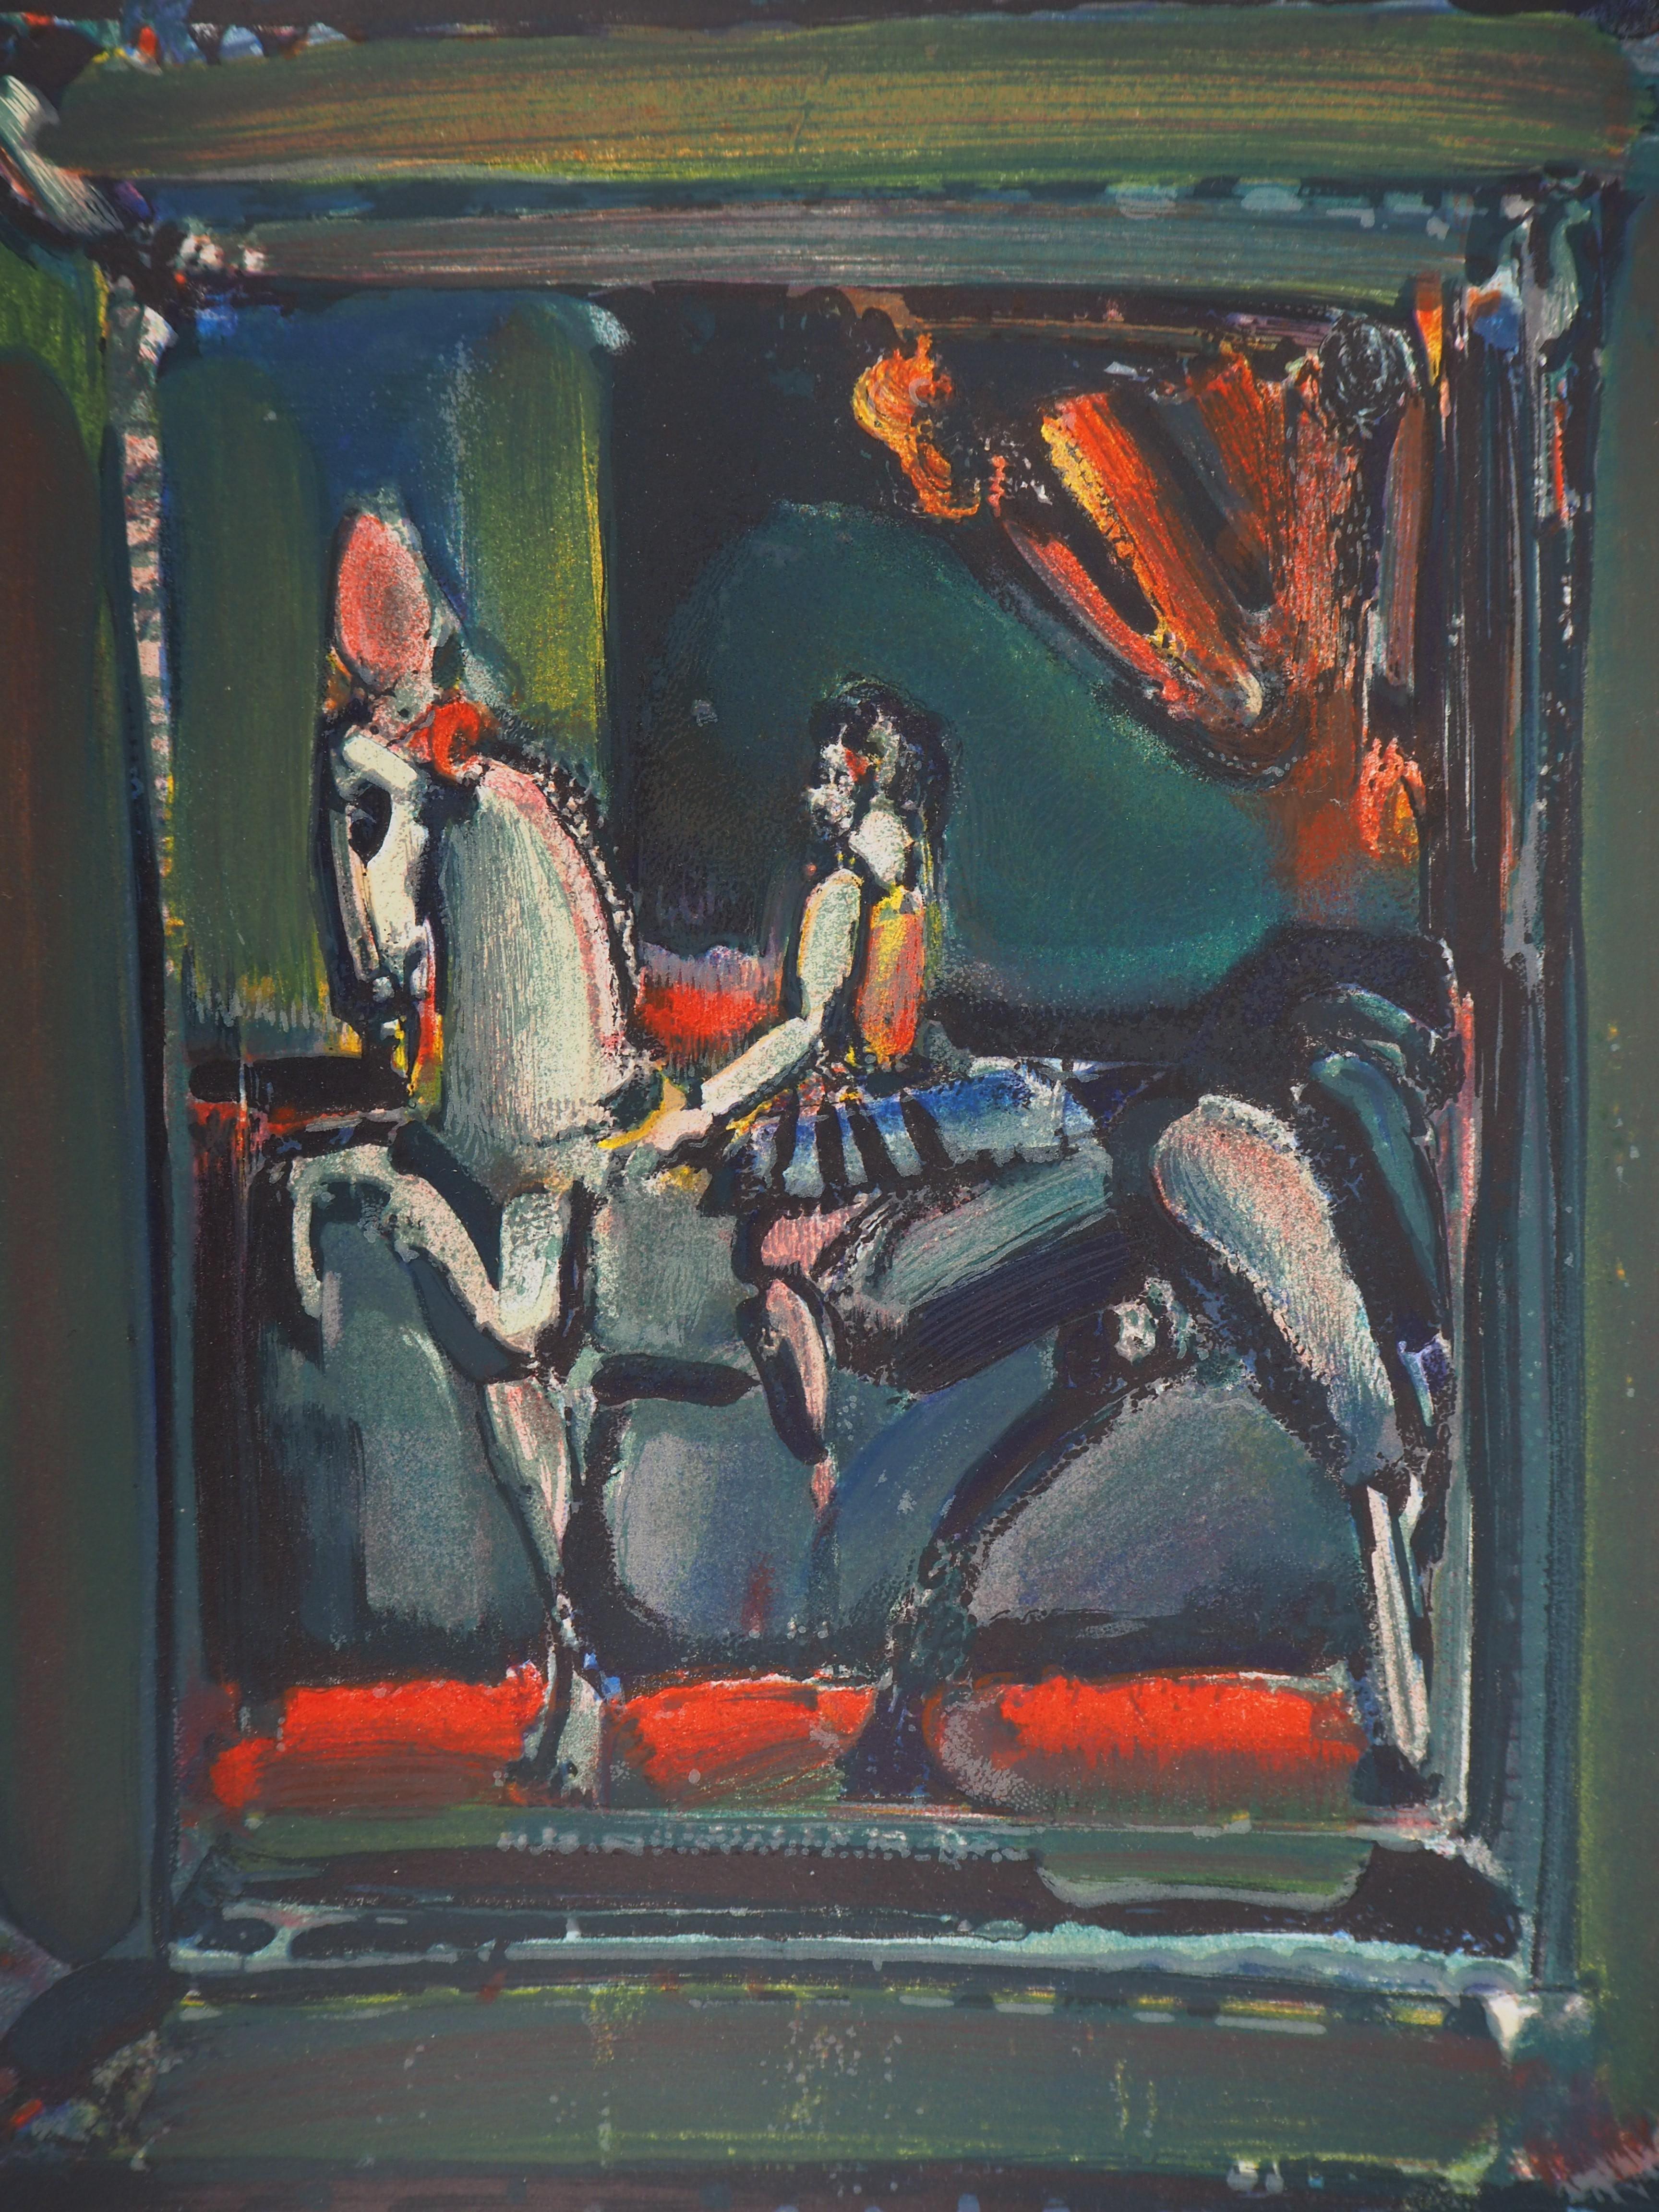 The Horse Rider - Original lithograph, Mourlot - Print by Georges Rouault